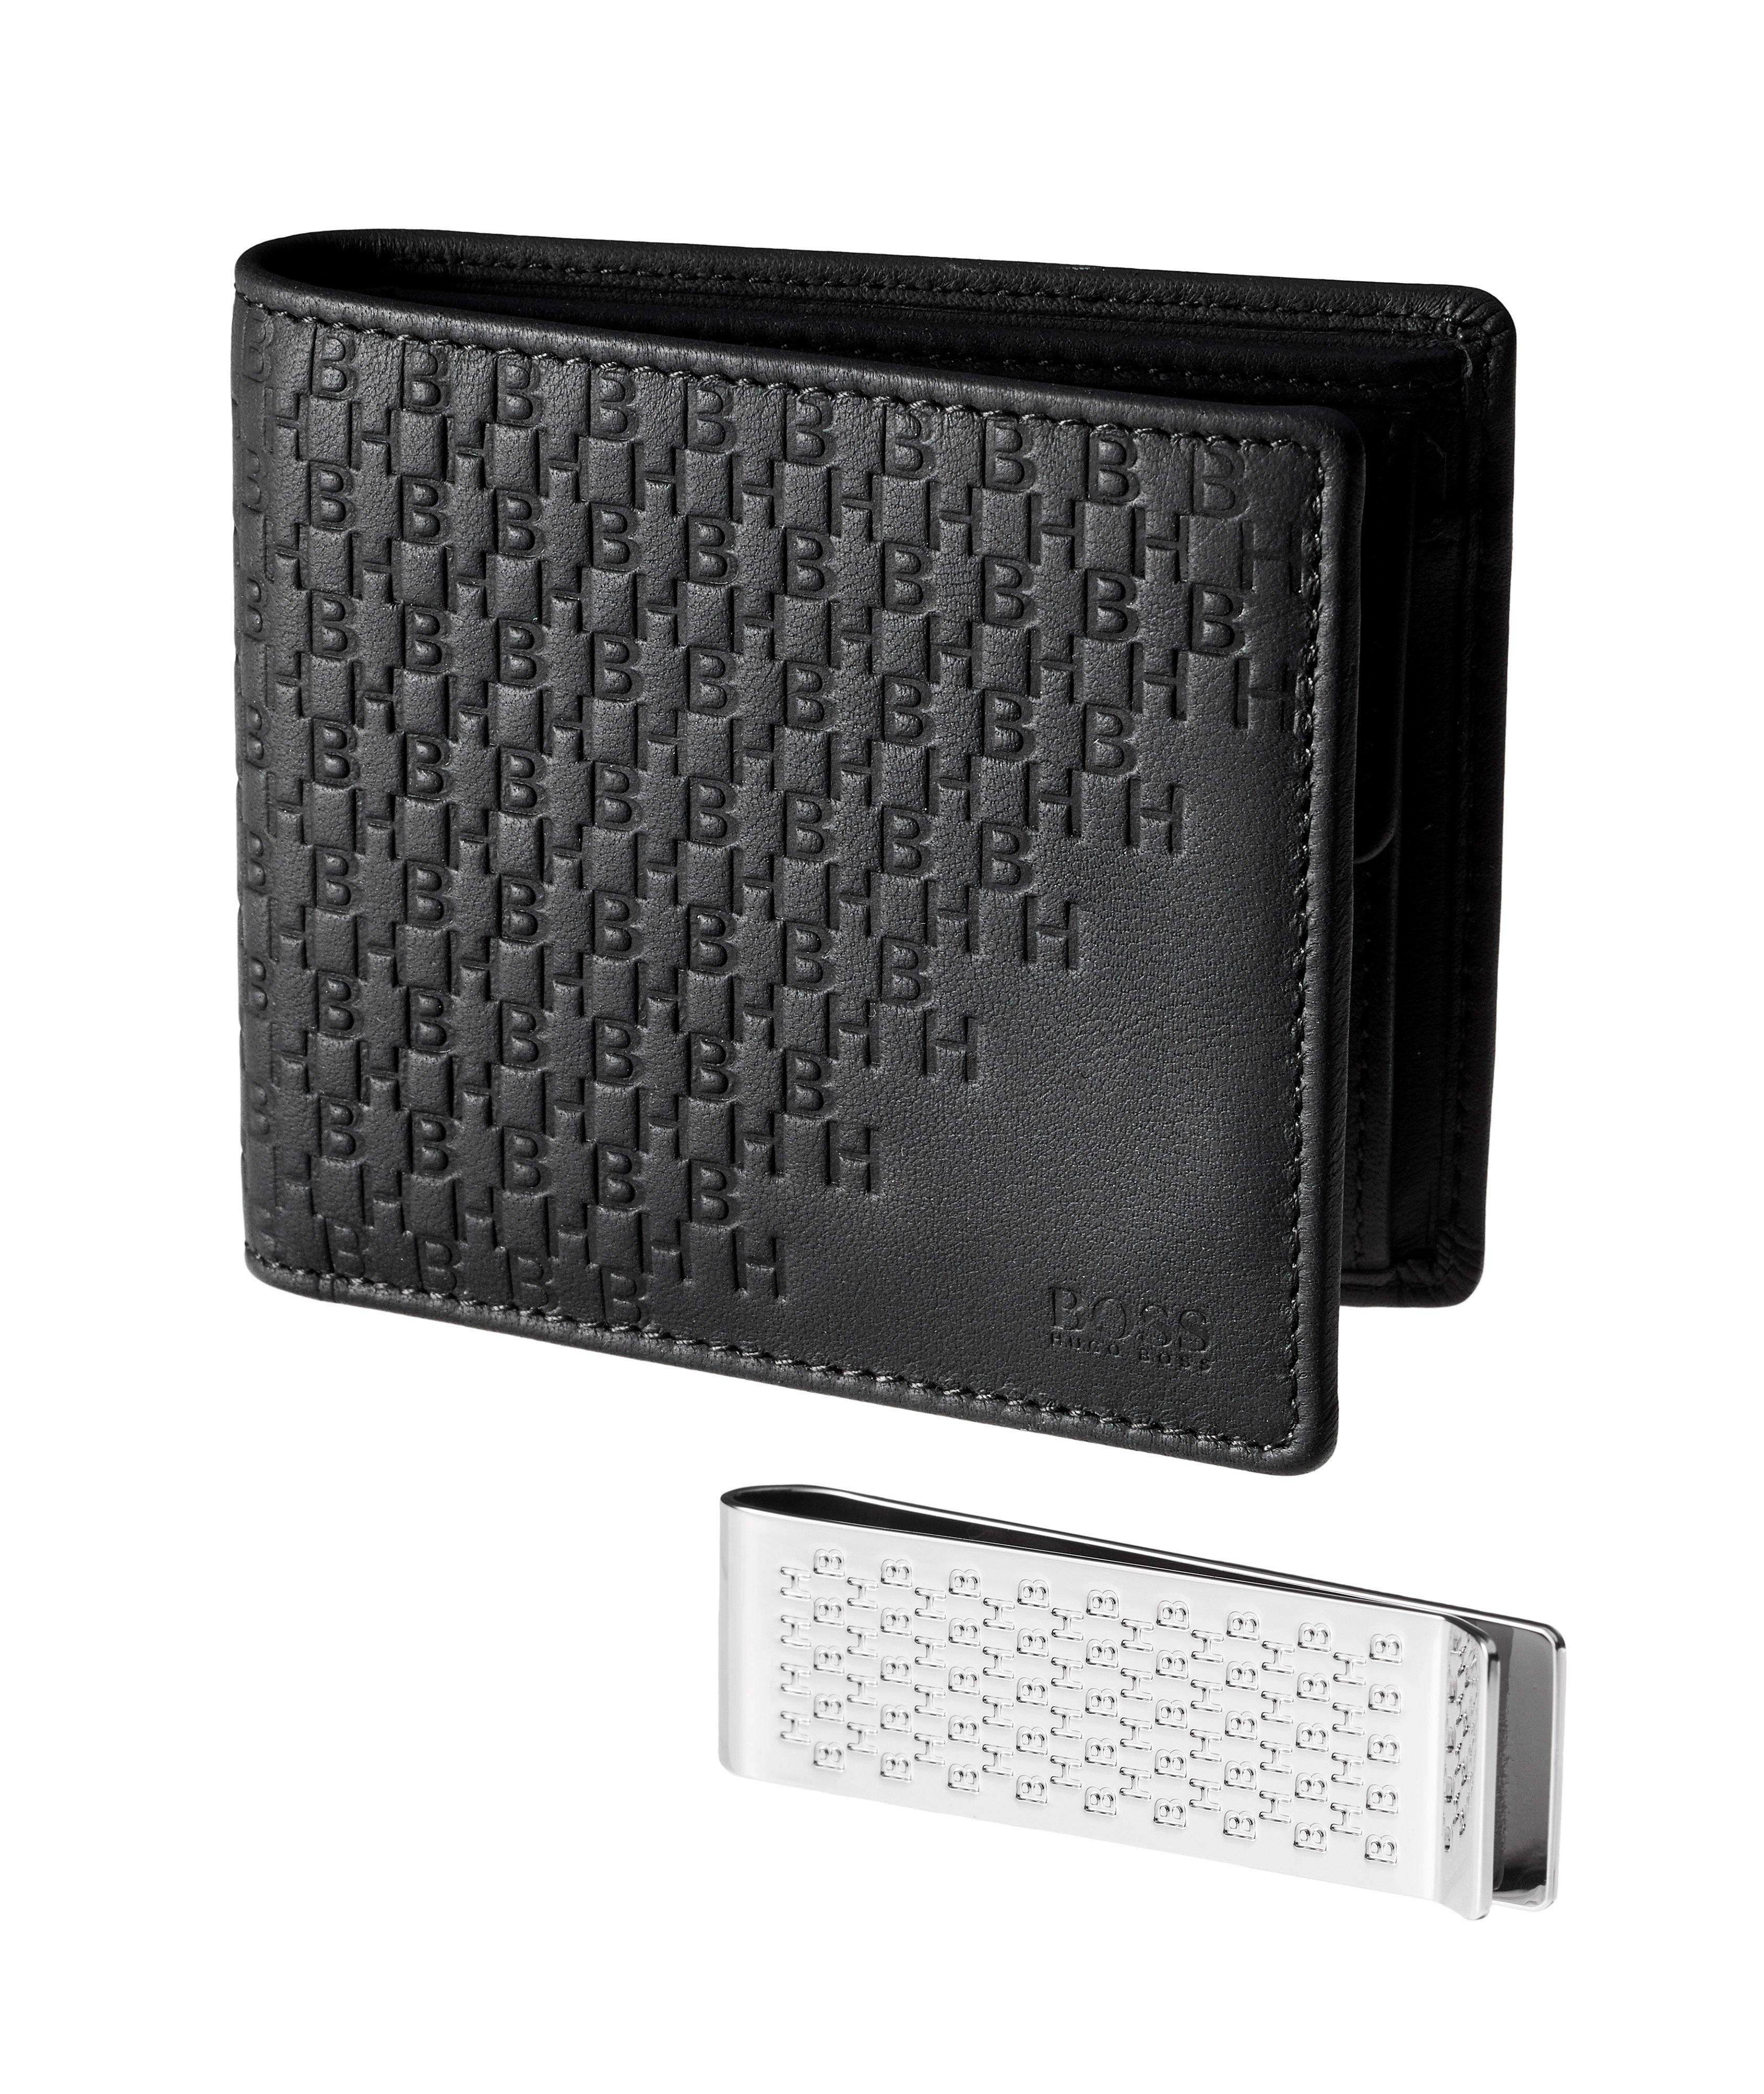 GBBM Leather Wallet And Money Clip Gift Set image 0